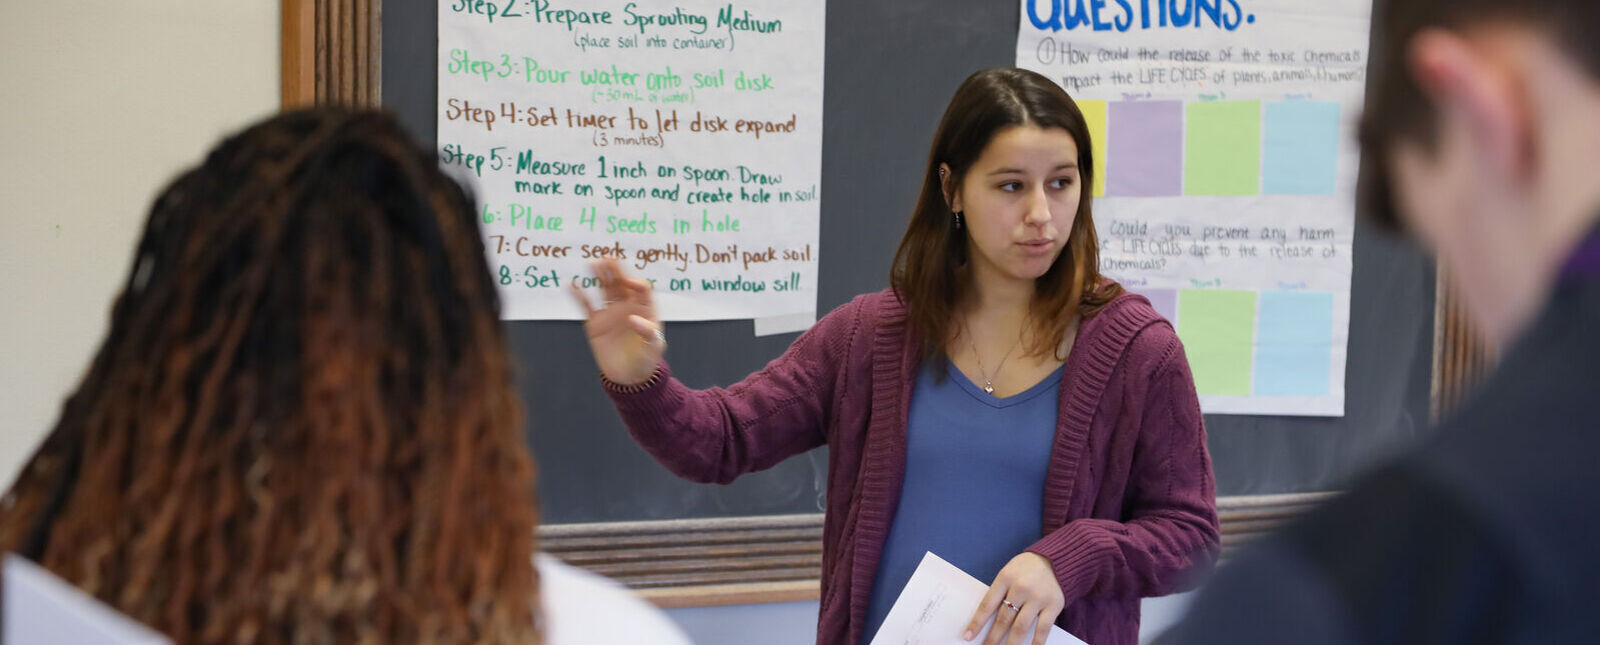 A female student practices teaching a lesson with posters on a chalkboard in an education class